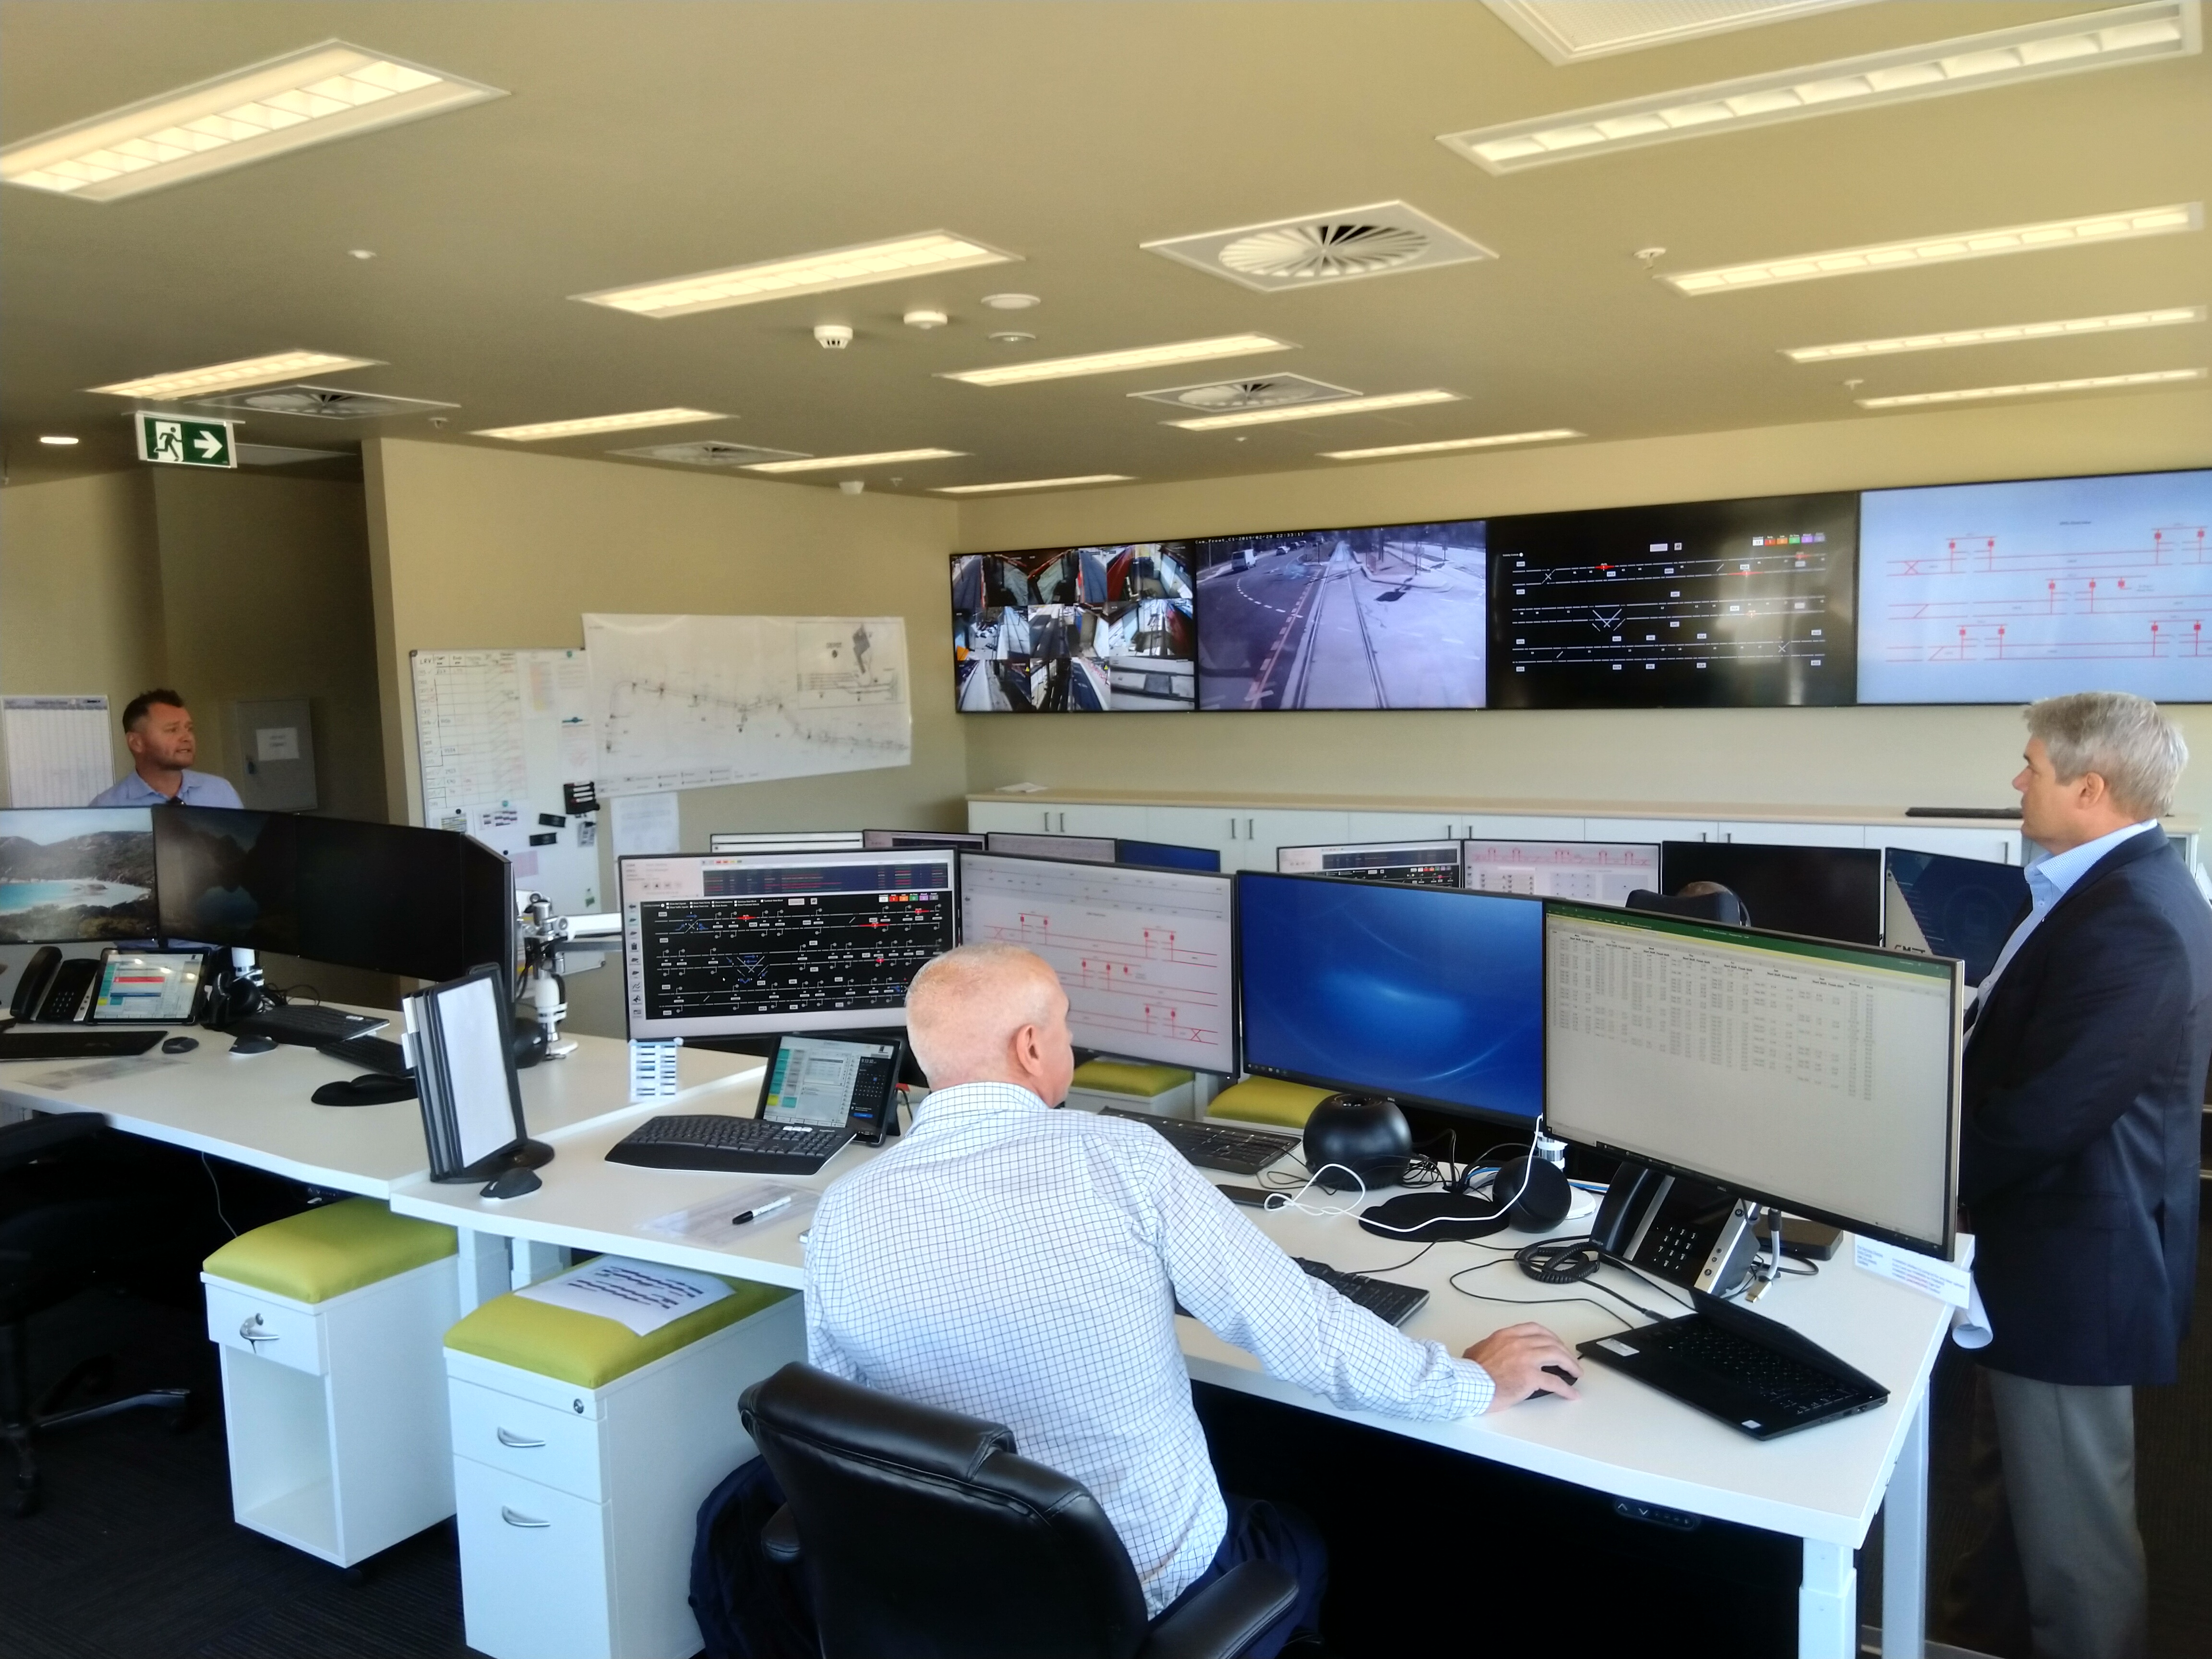 Canberra Metro operations control centre at the Mitchell Depot